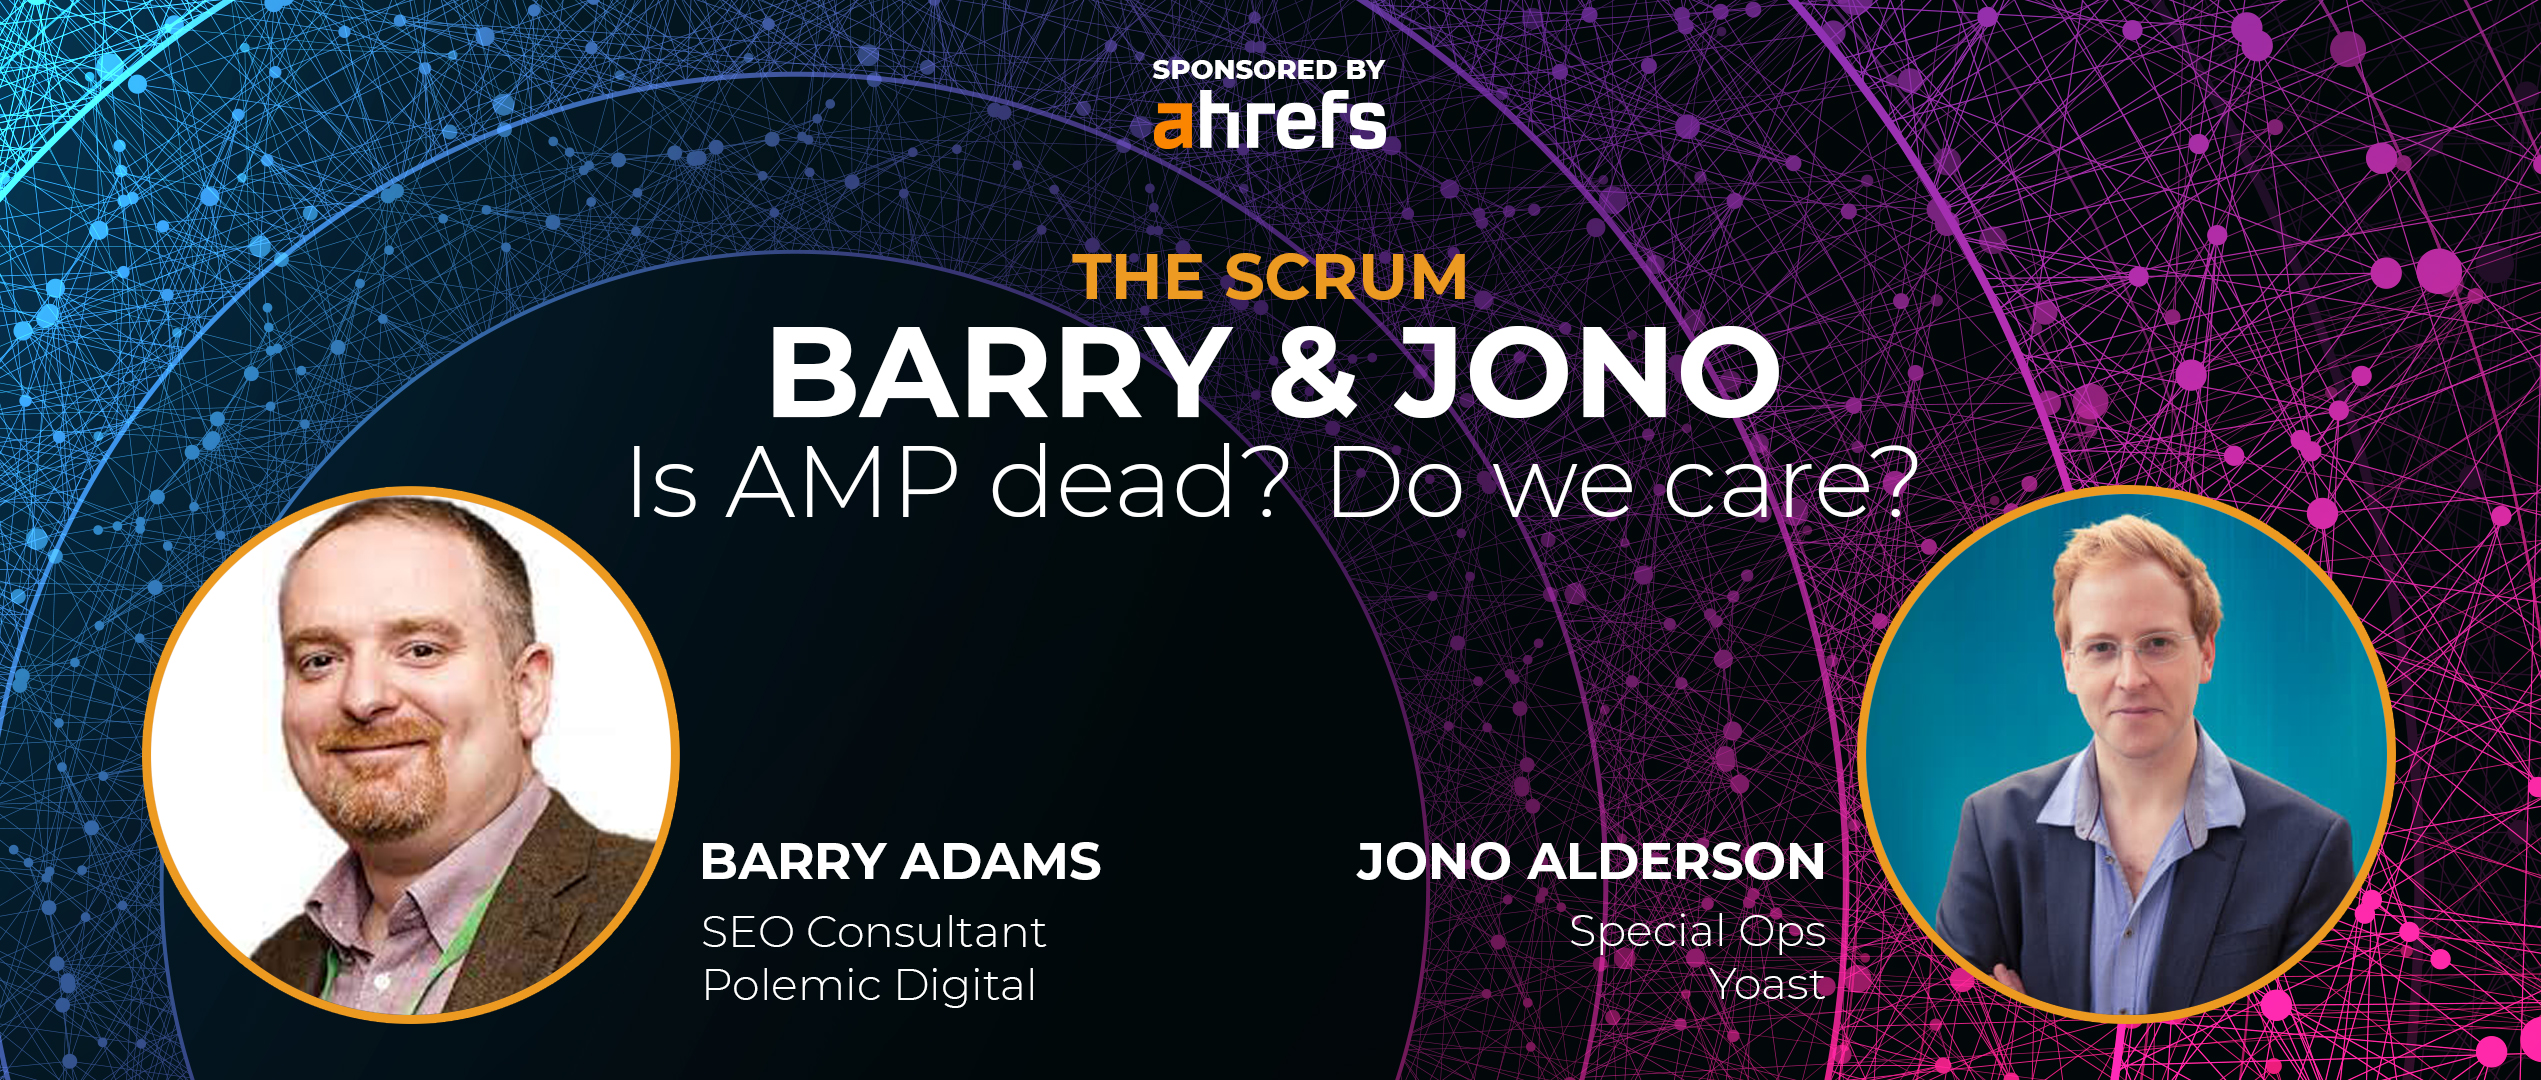 Episode 489 - The Scrum 2: To AMP or Not to AMP.